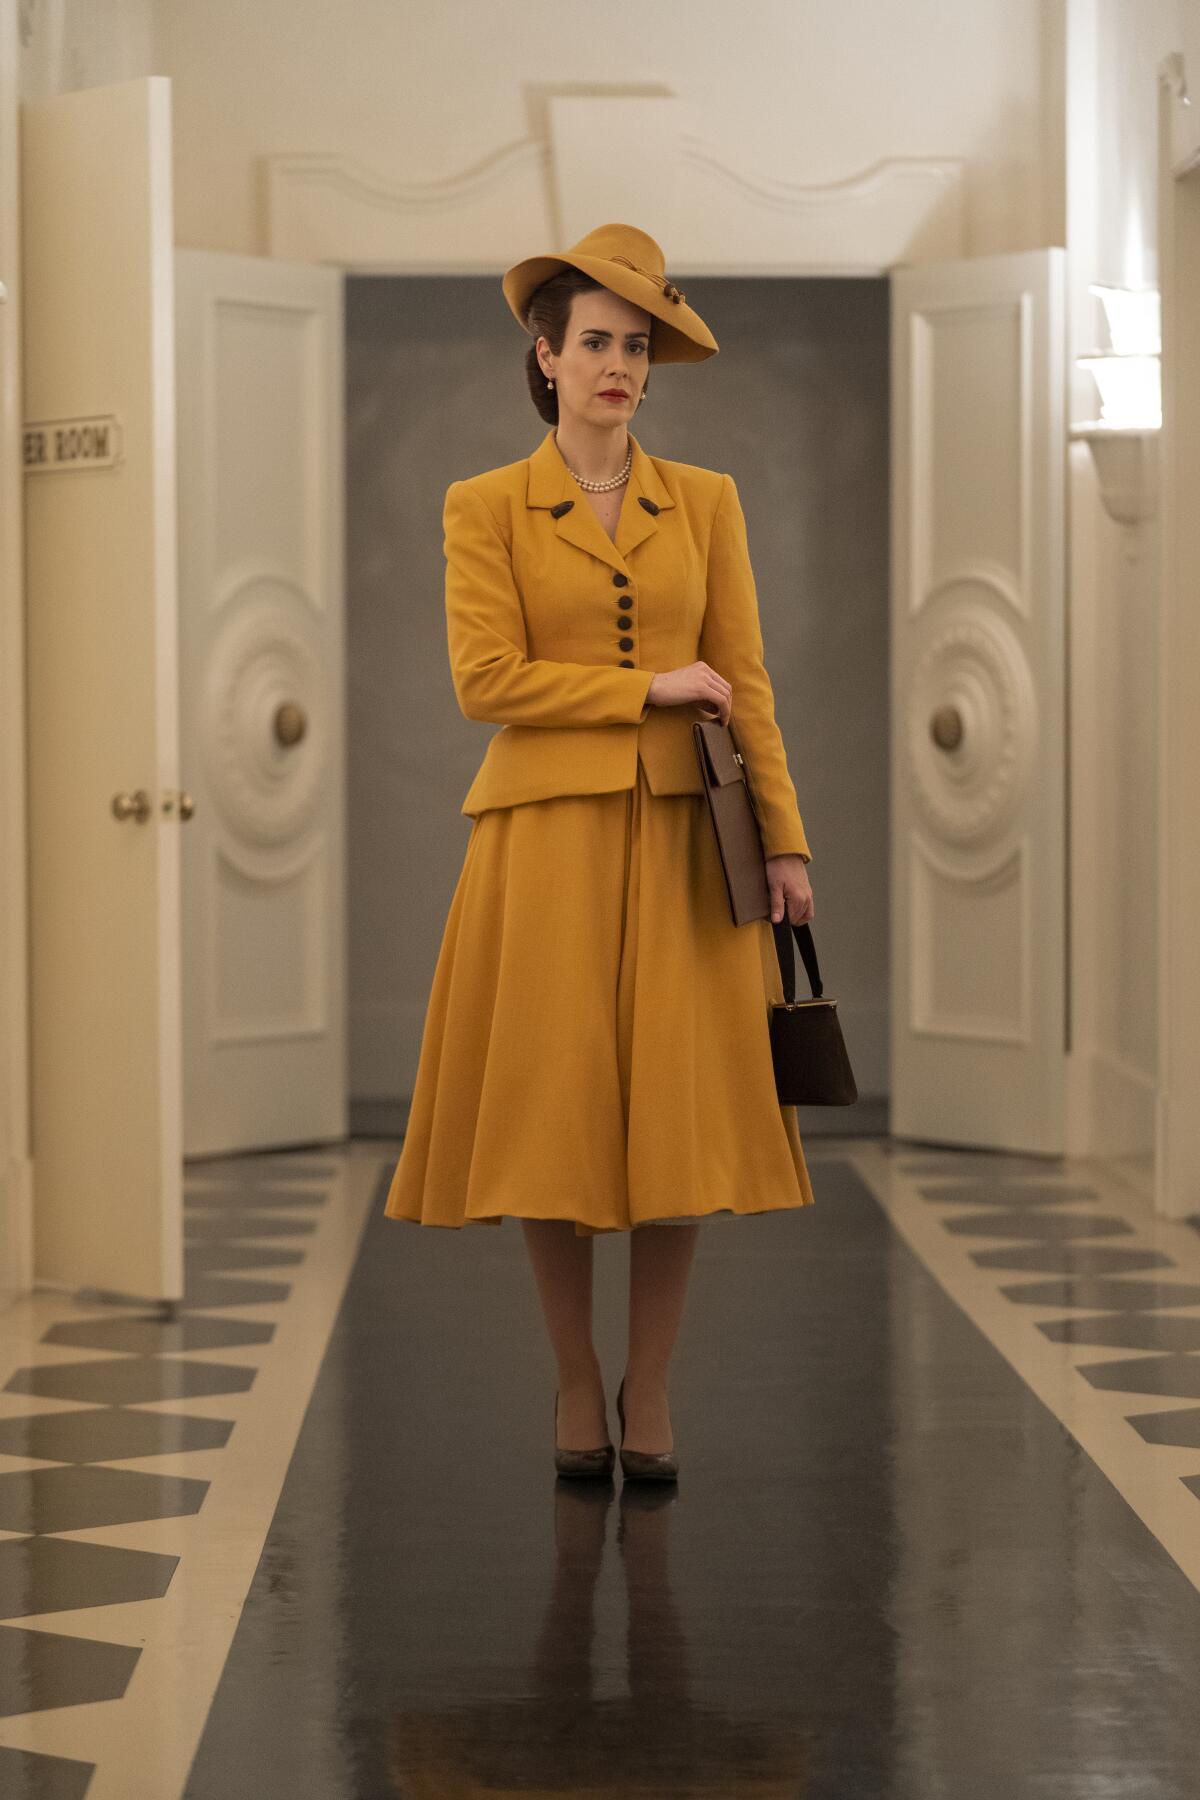 Sarah Paulson as Mildred Ratched in Netflix's prequel of the infamous villain.